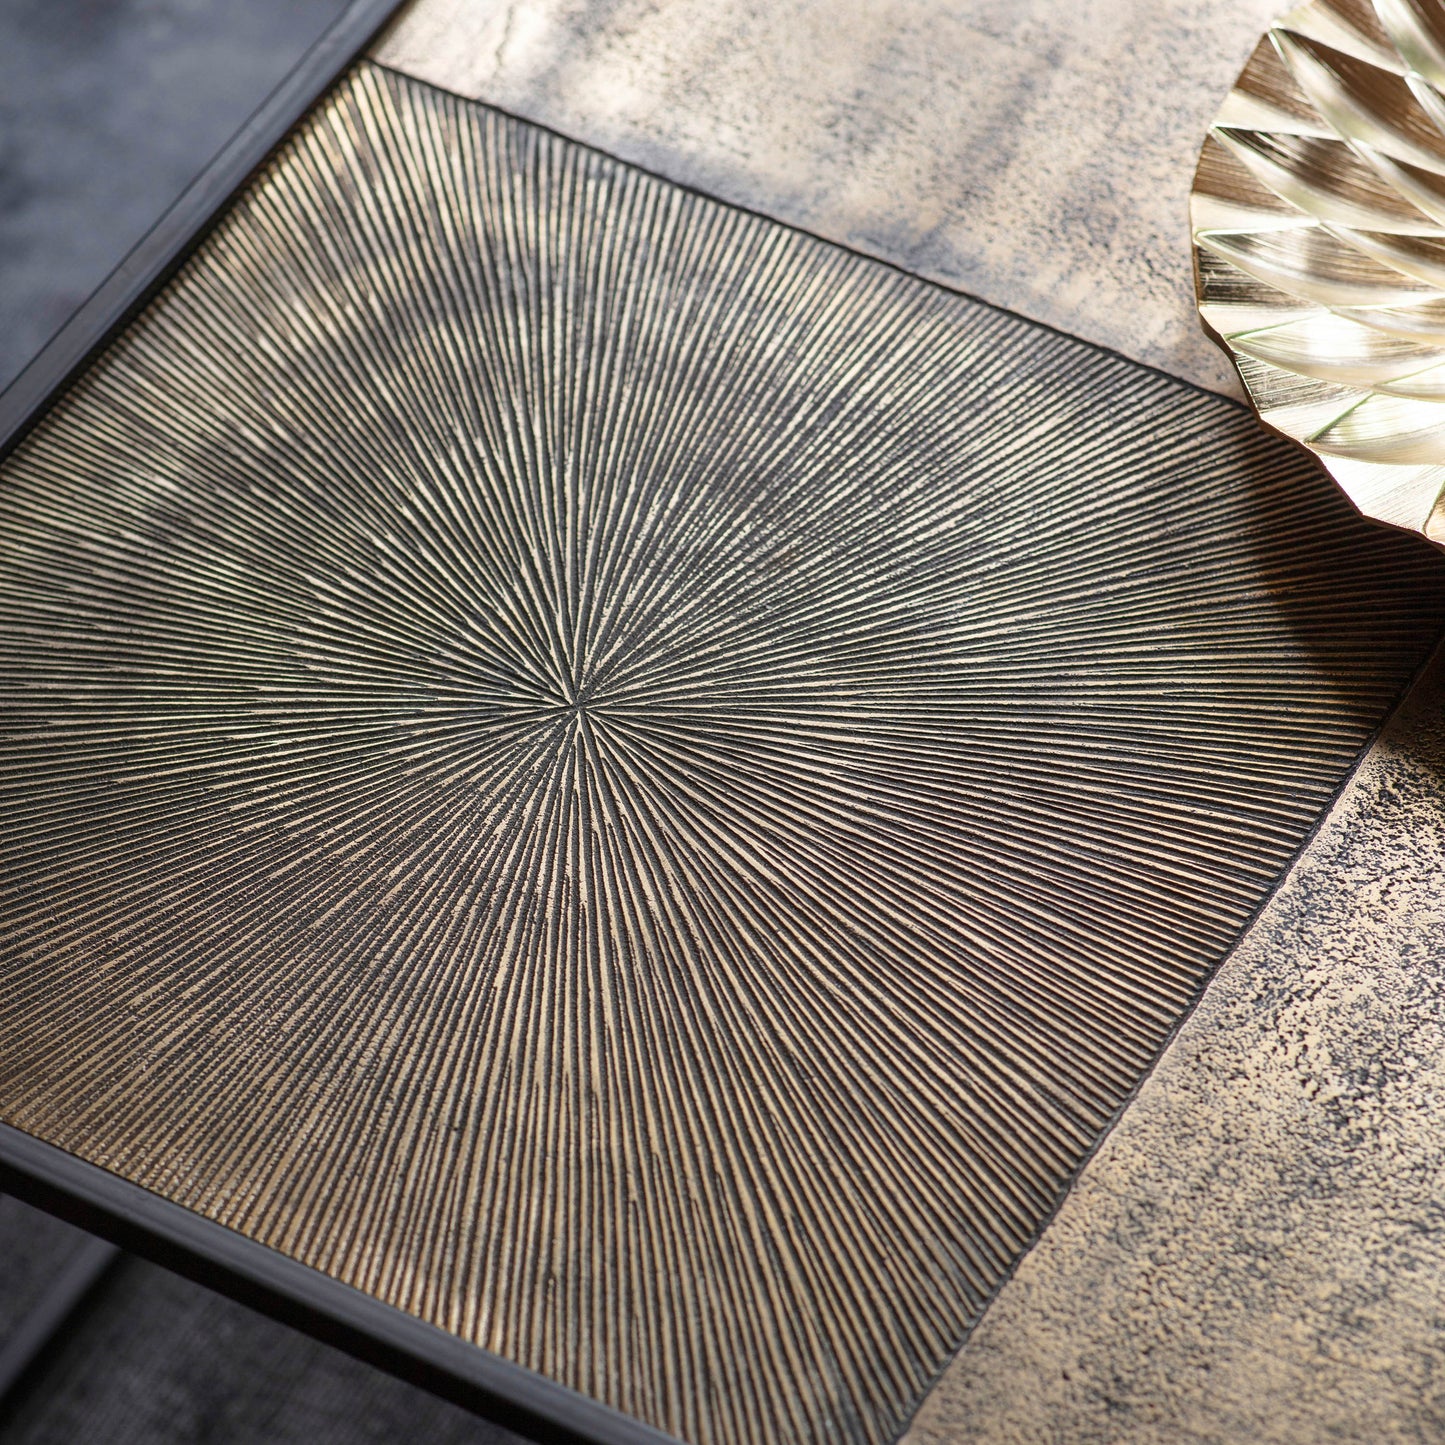 A Bigbury Coffee Table Antique Gold 800x800x400mm with a starburst pattern on it, perfect for home furniture and interior decor.